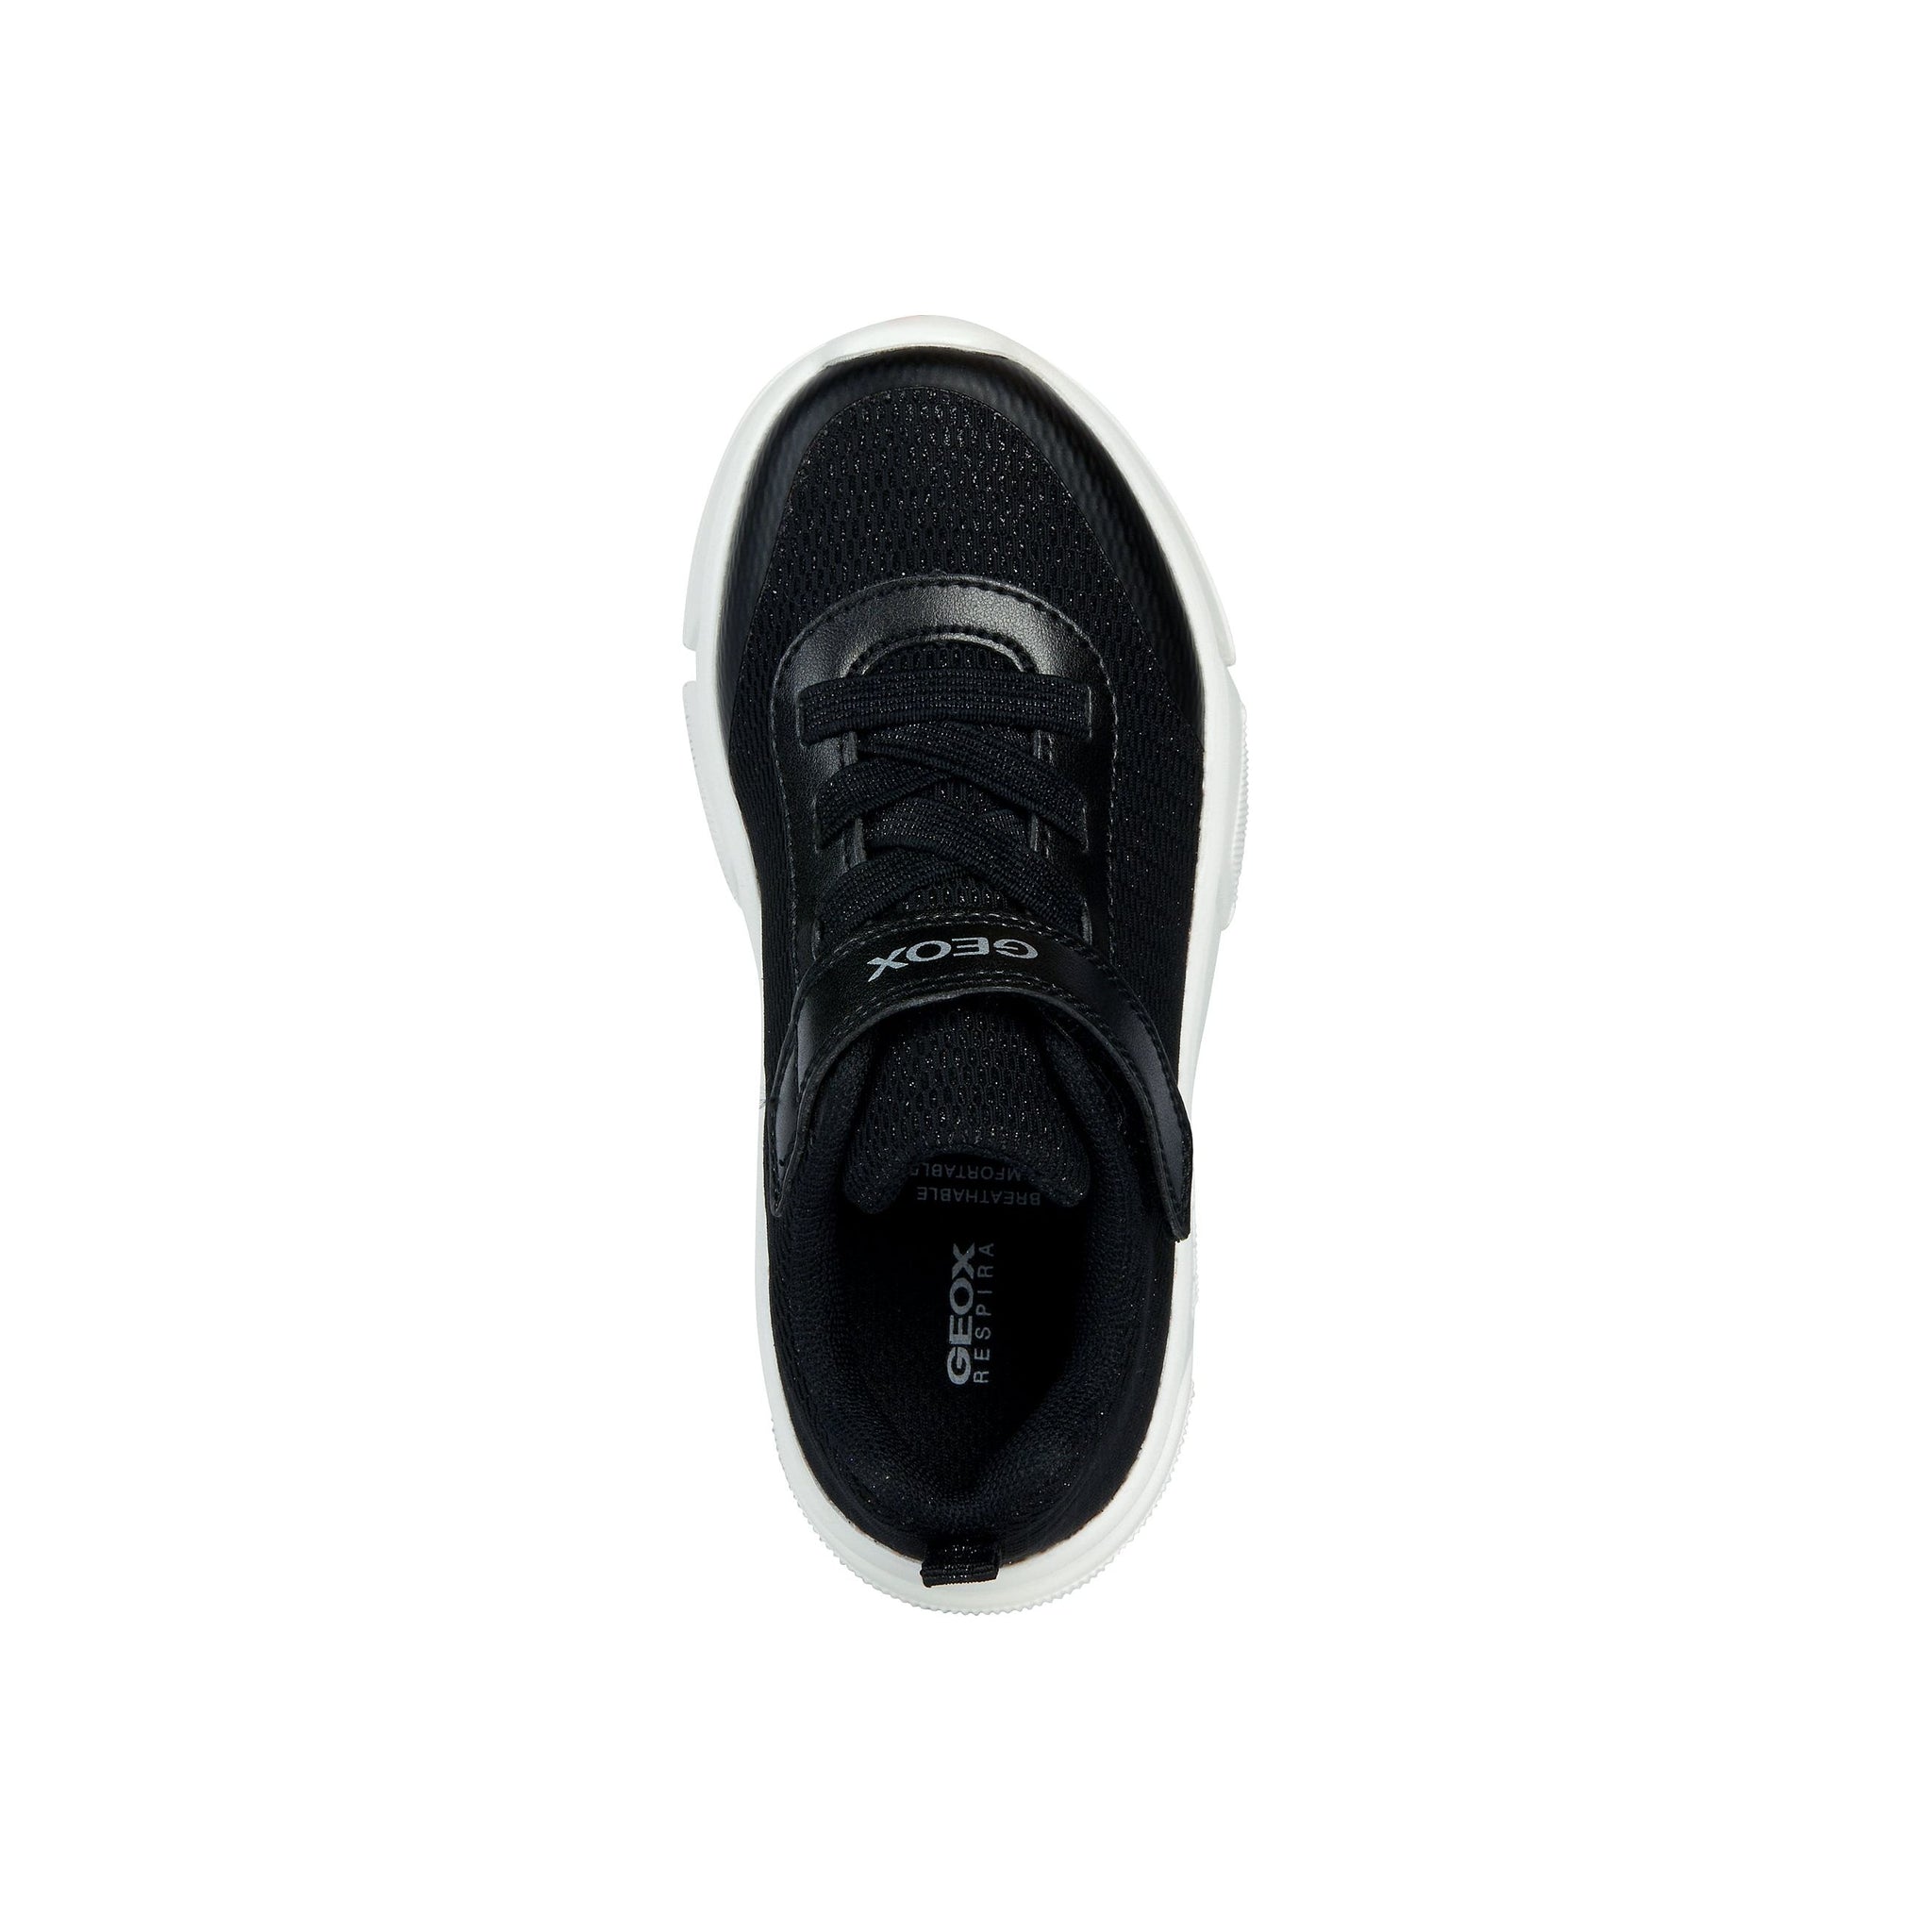 Geox Aril (J36DLD)- Gilrs Velcro Trainer in Black | Geox Shoes | Childrens Shoe Fitting | Wisemans | Bantry | West Cork | Ireland